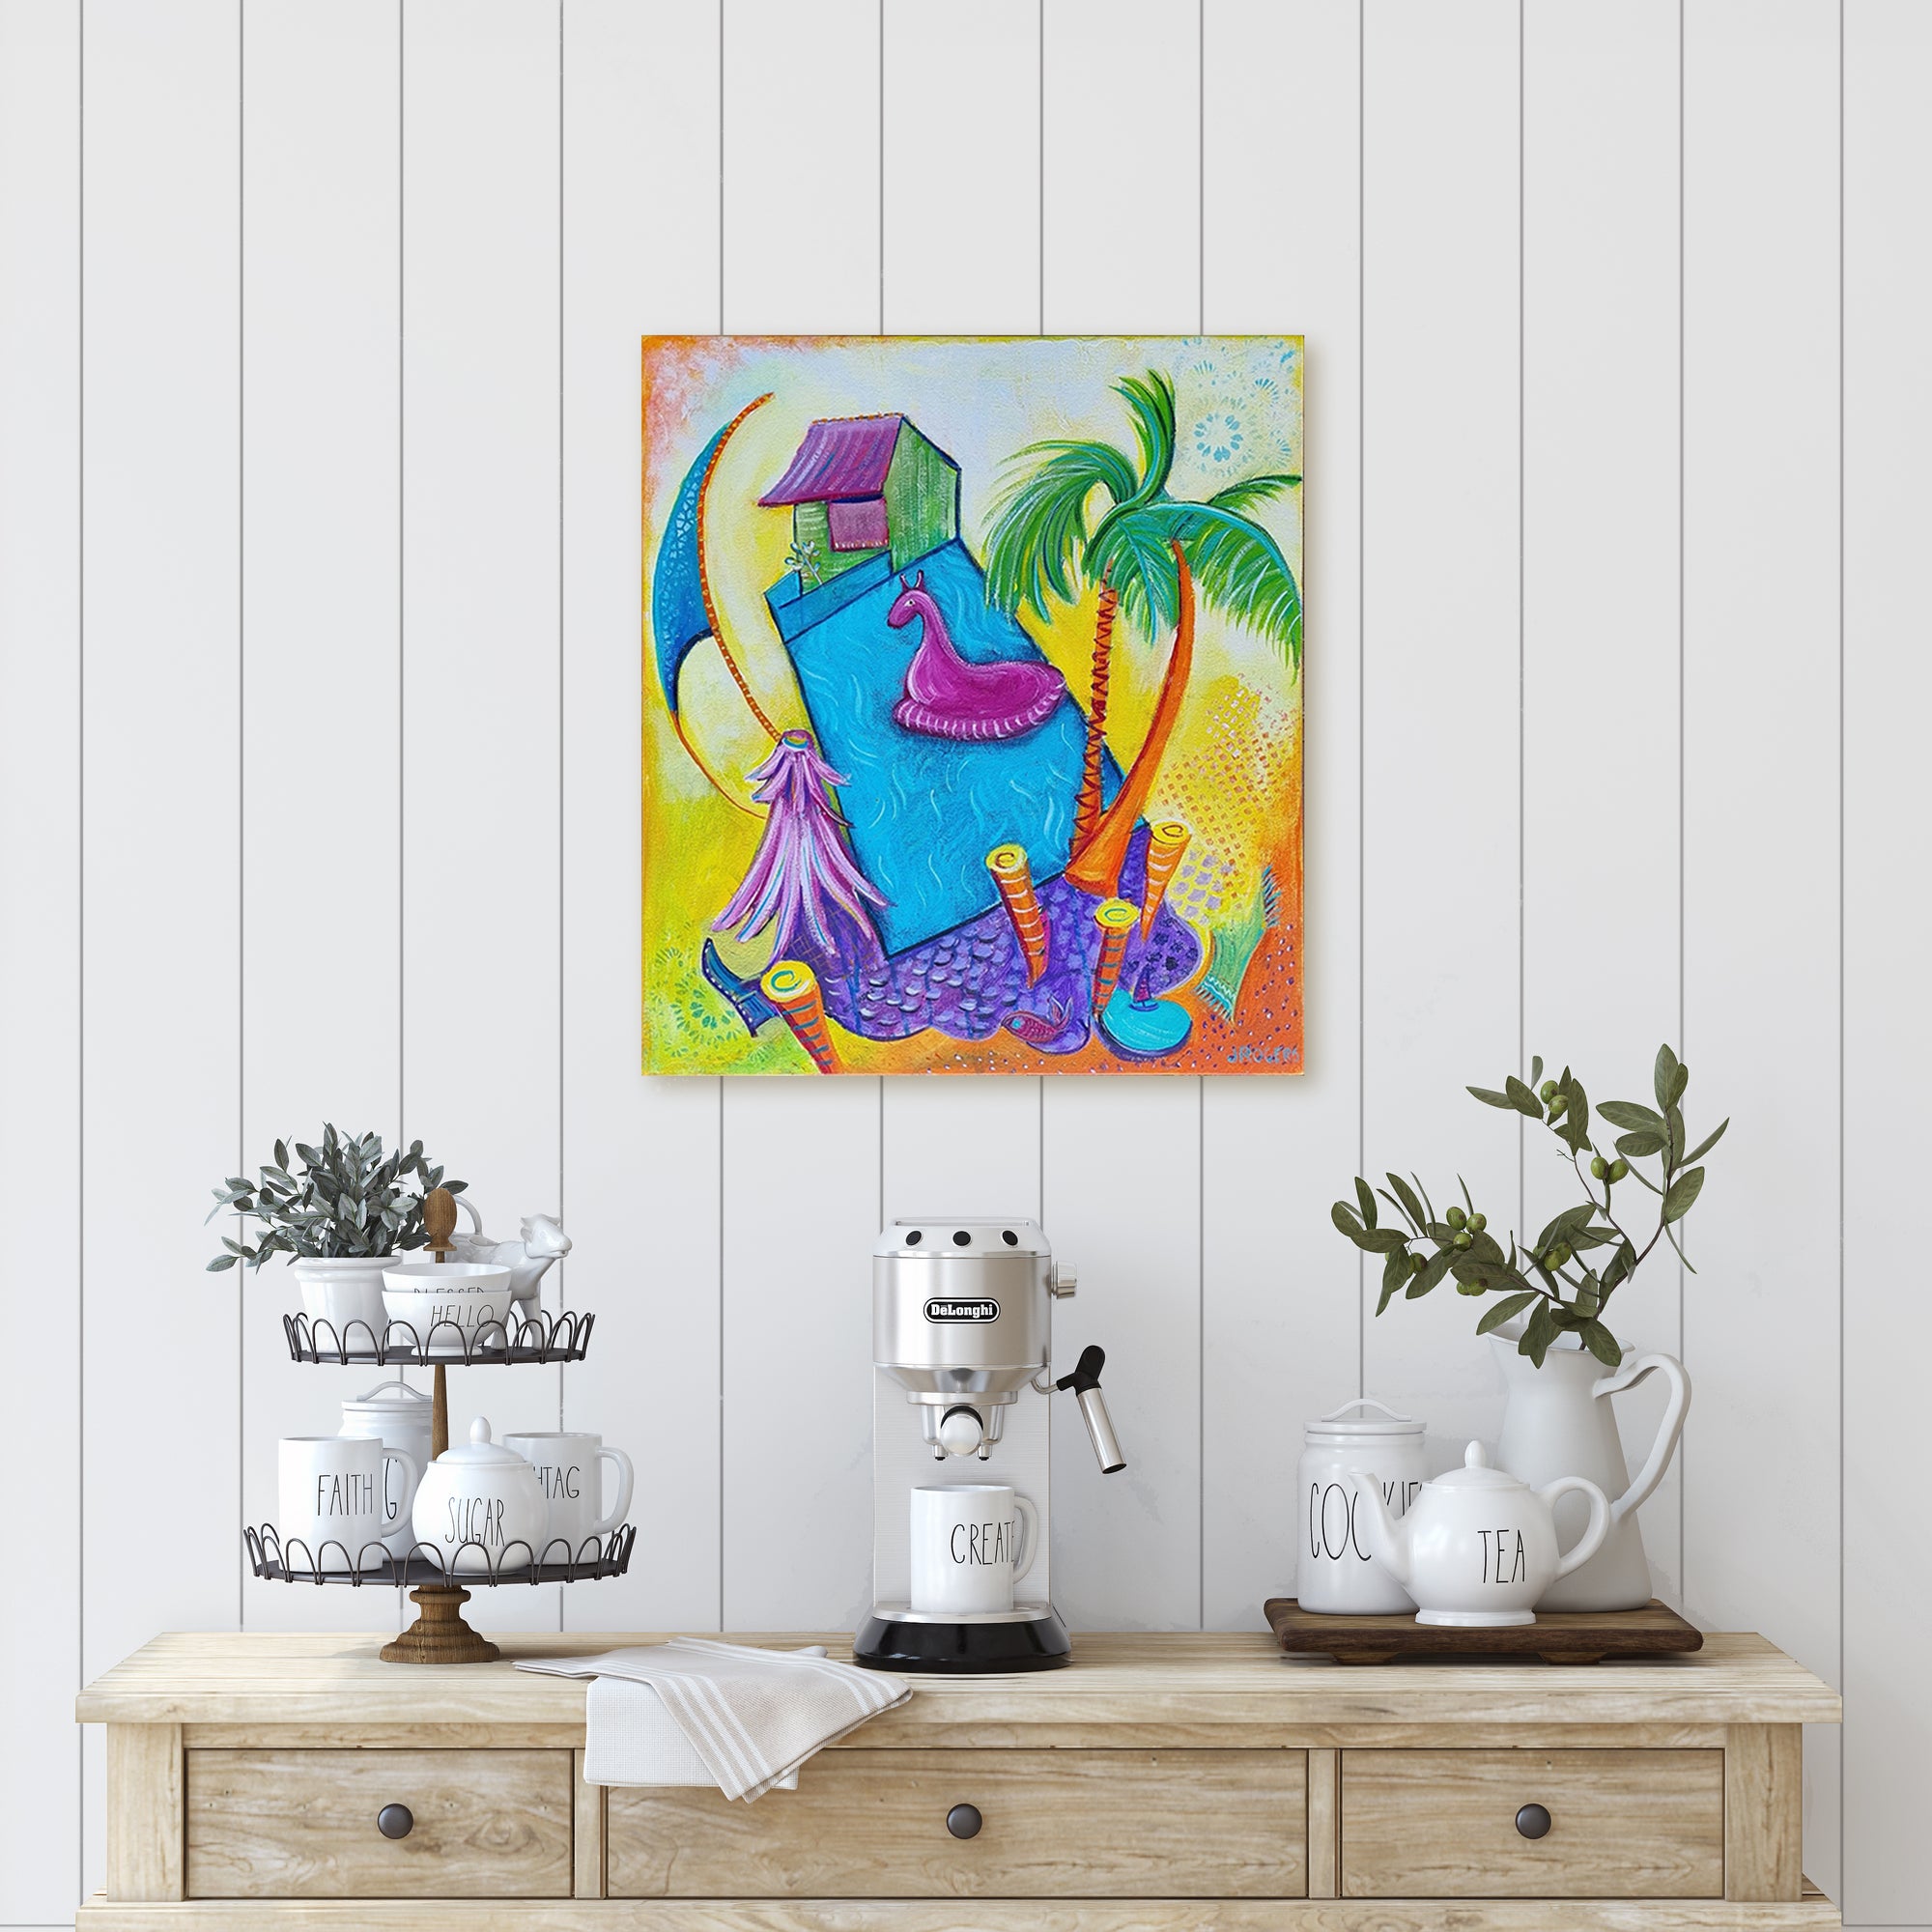 This is a fun and bright painting. Welcome to the Pool House! Add a unique and eye-catching piece of art to your home with this colourful painting. It features an inviting blue pool surrounded by lush palm trees, lively colours, and some fun elements - the perfect place to relax during the summer months. Wherever it is in your home, it is sure to become the conversation piece in any gathering by Australian Artist Jenni Rogers